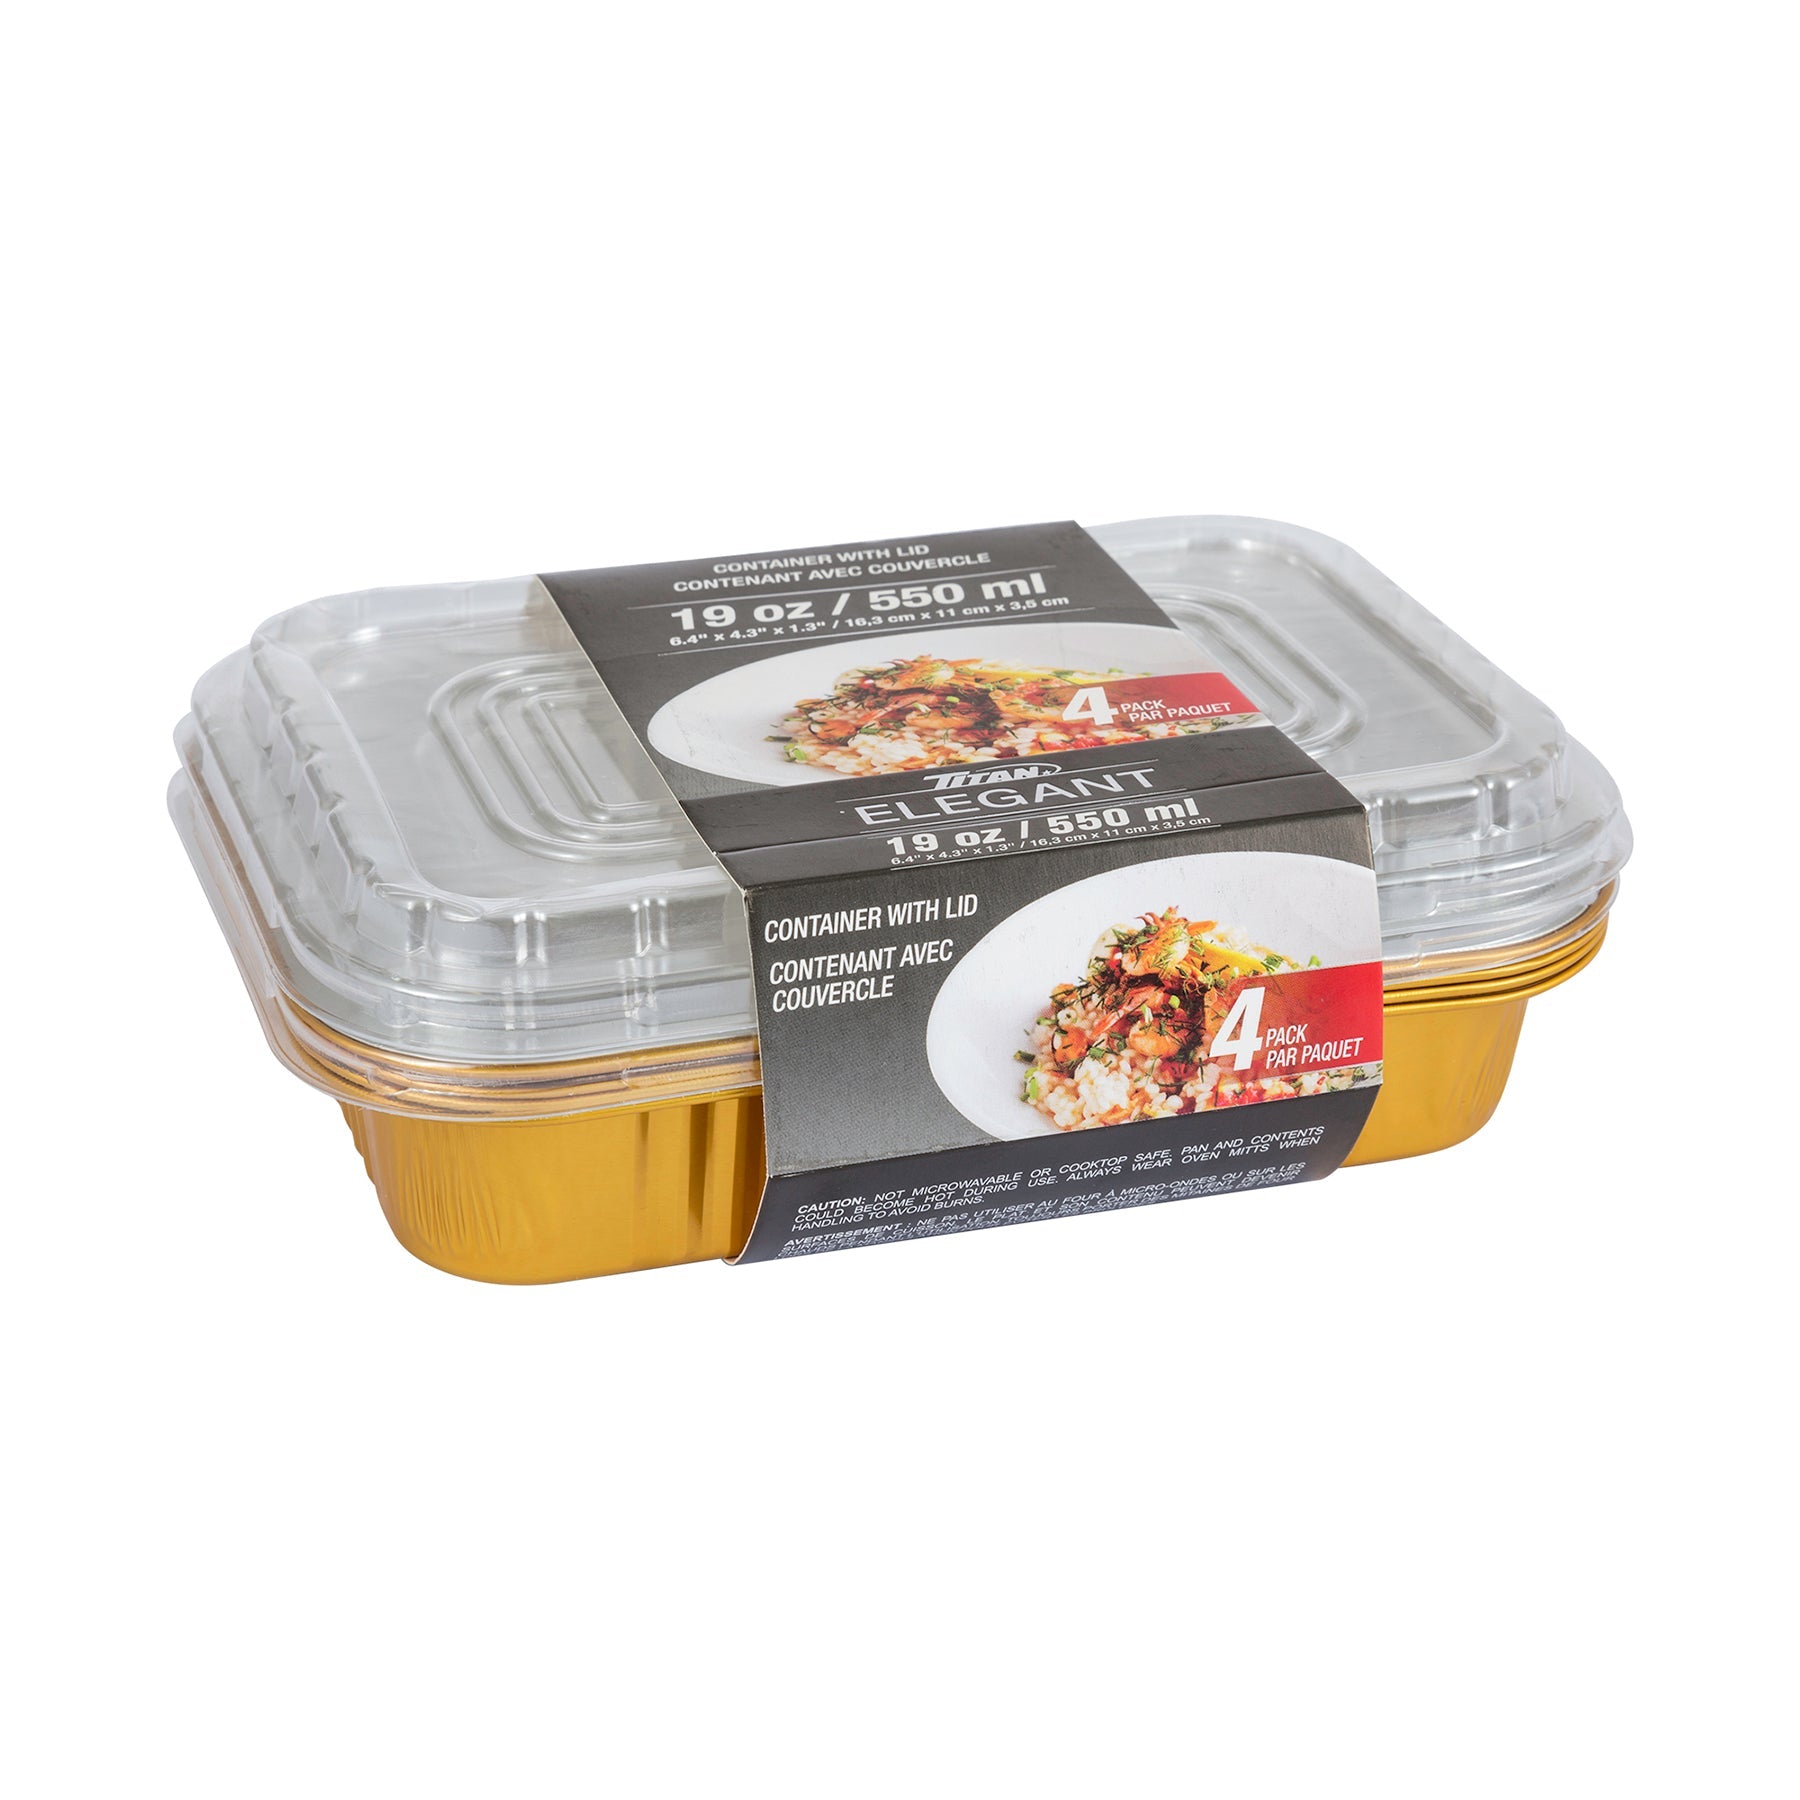 Titan Elegant 4 Aluminium Containers with Lid Gold/Silver 6.4x4.3x1.3in  19oz